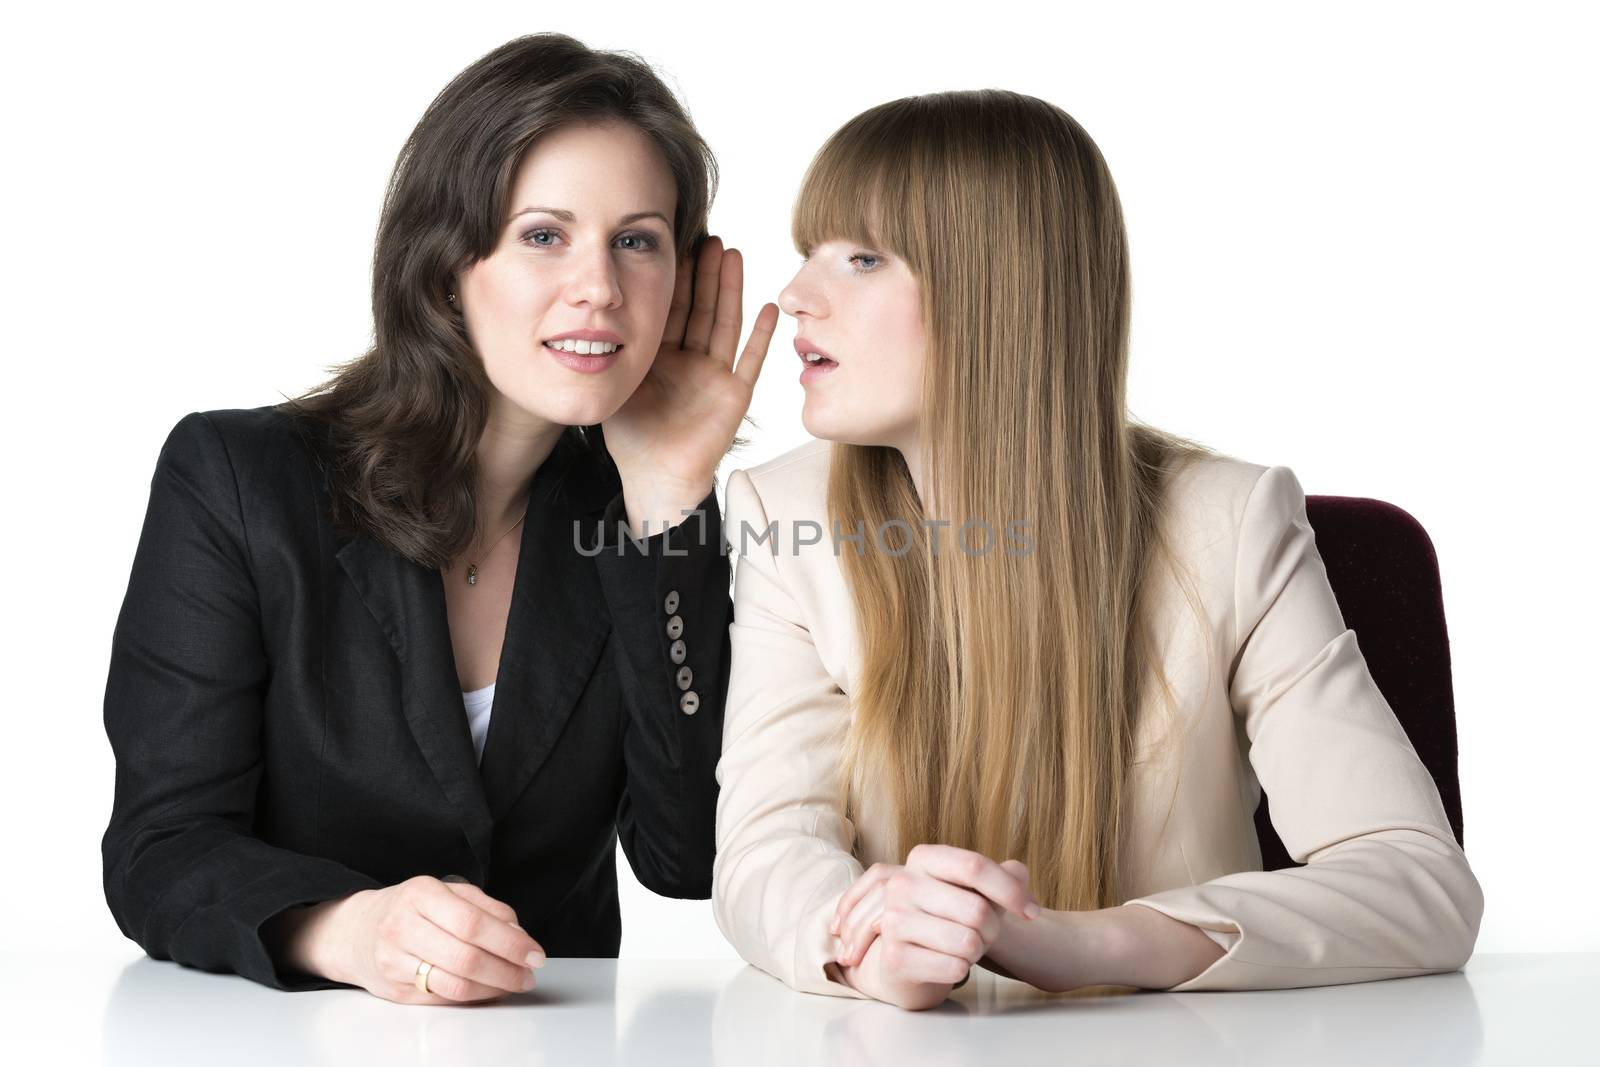 Two happy women blonde and brunette in a black and white jacket, sitting at a white table. Isolated on white background.